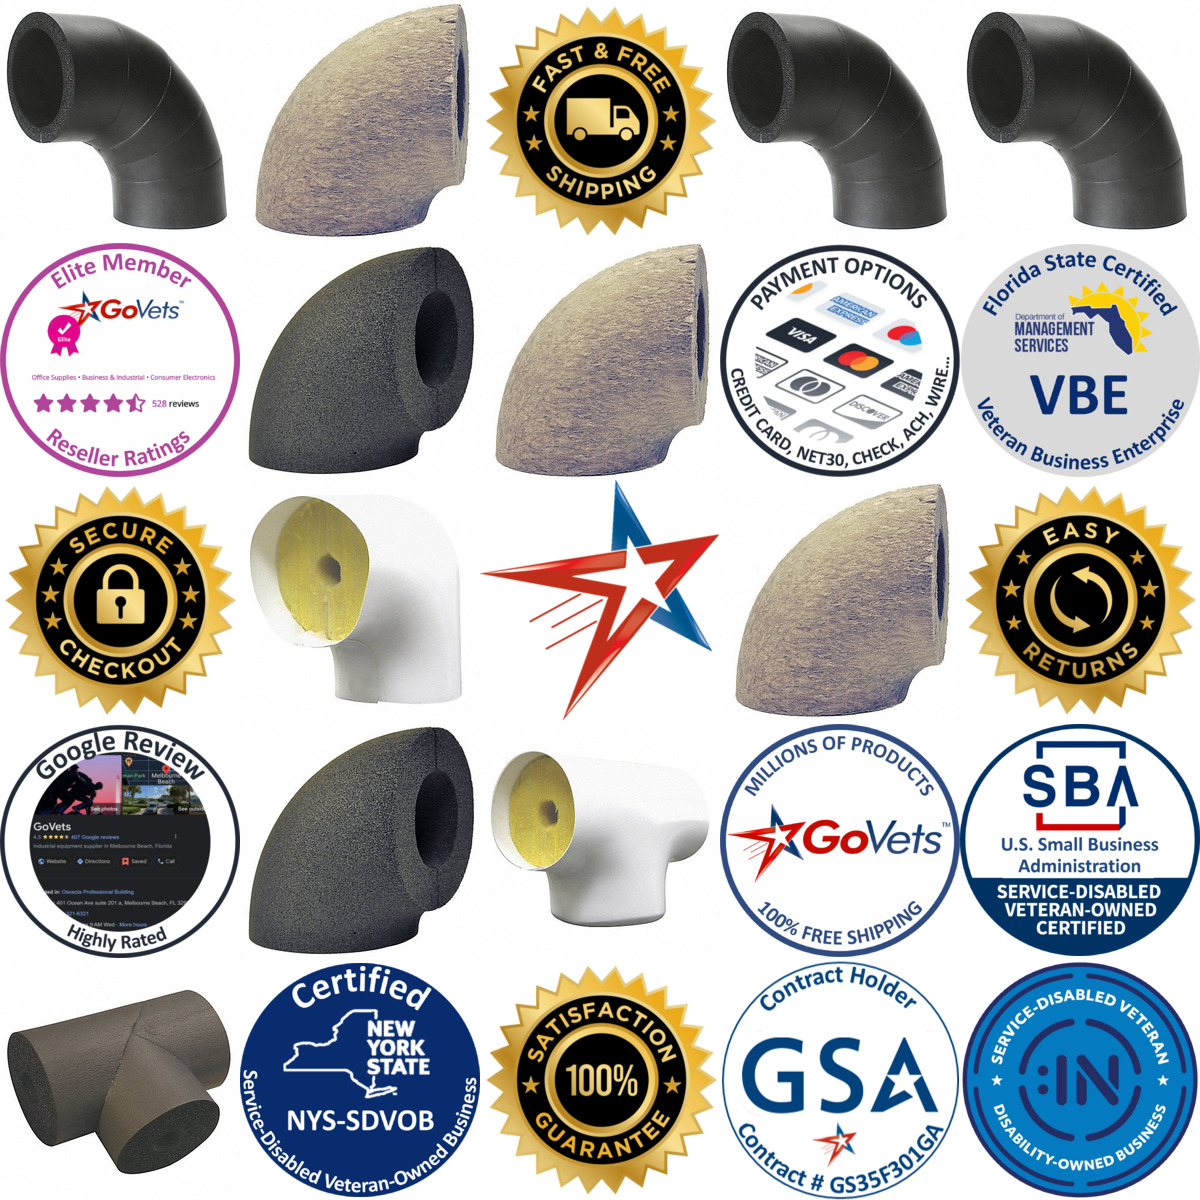 A selection of Pipe Fitting Insulation products on GoVets